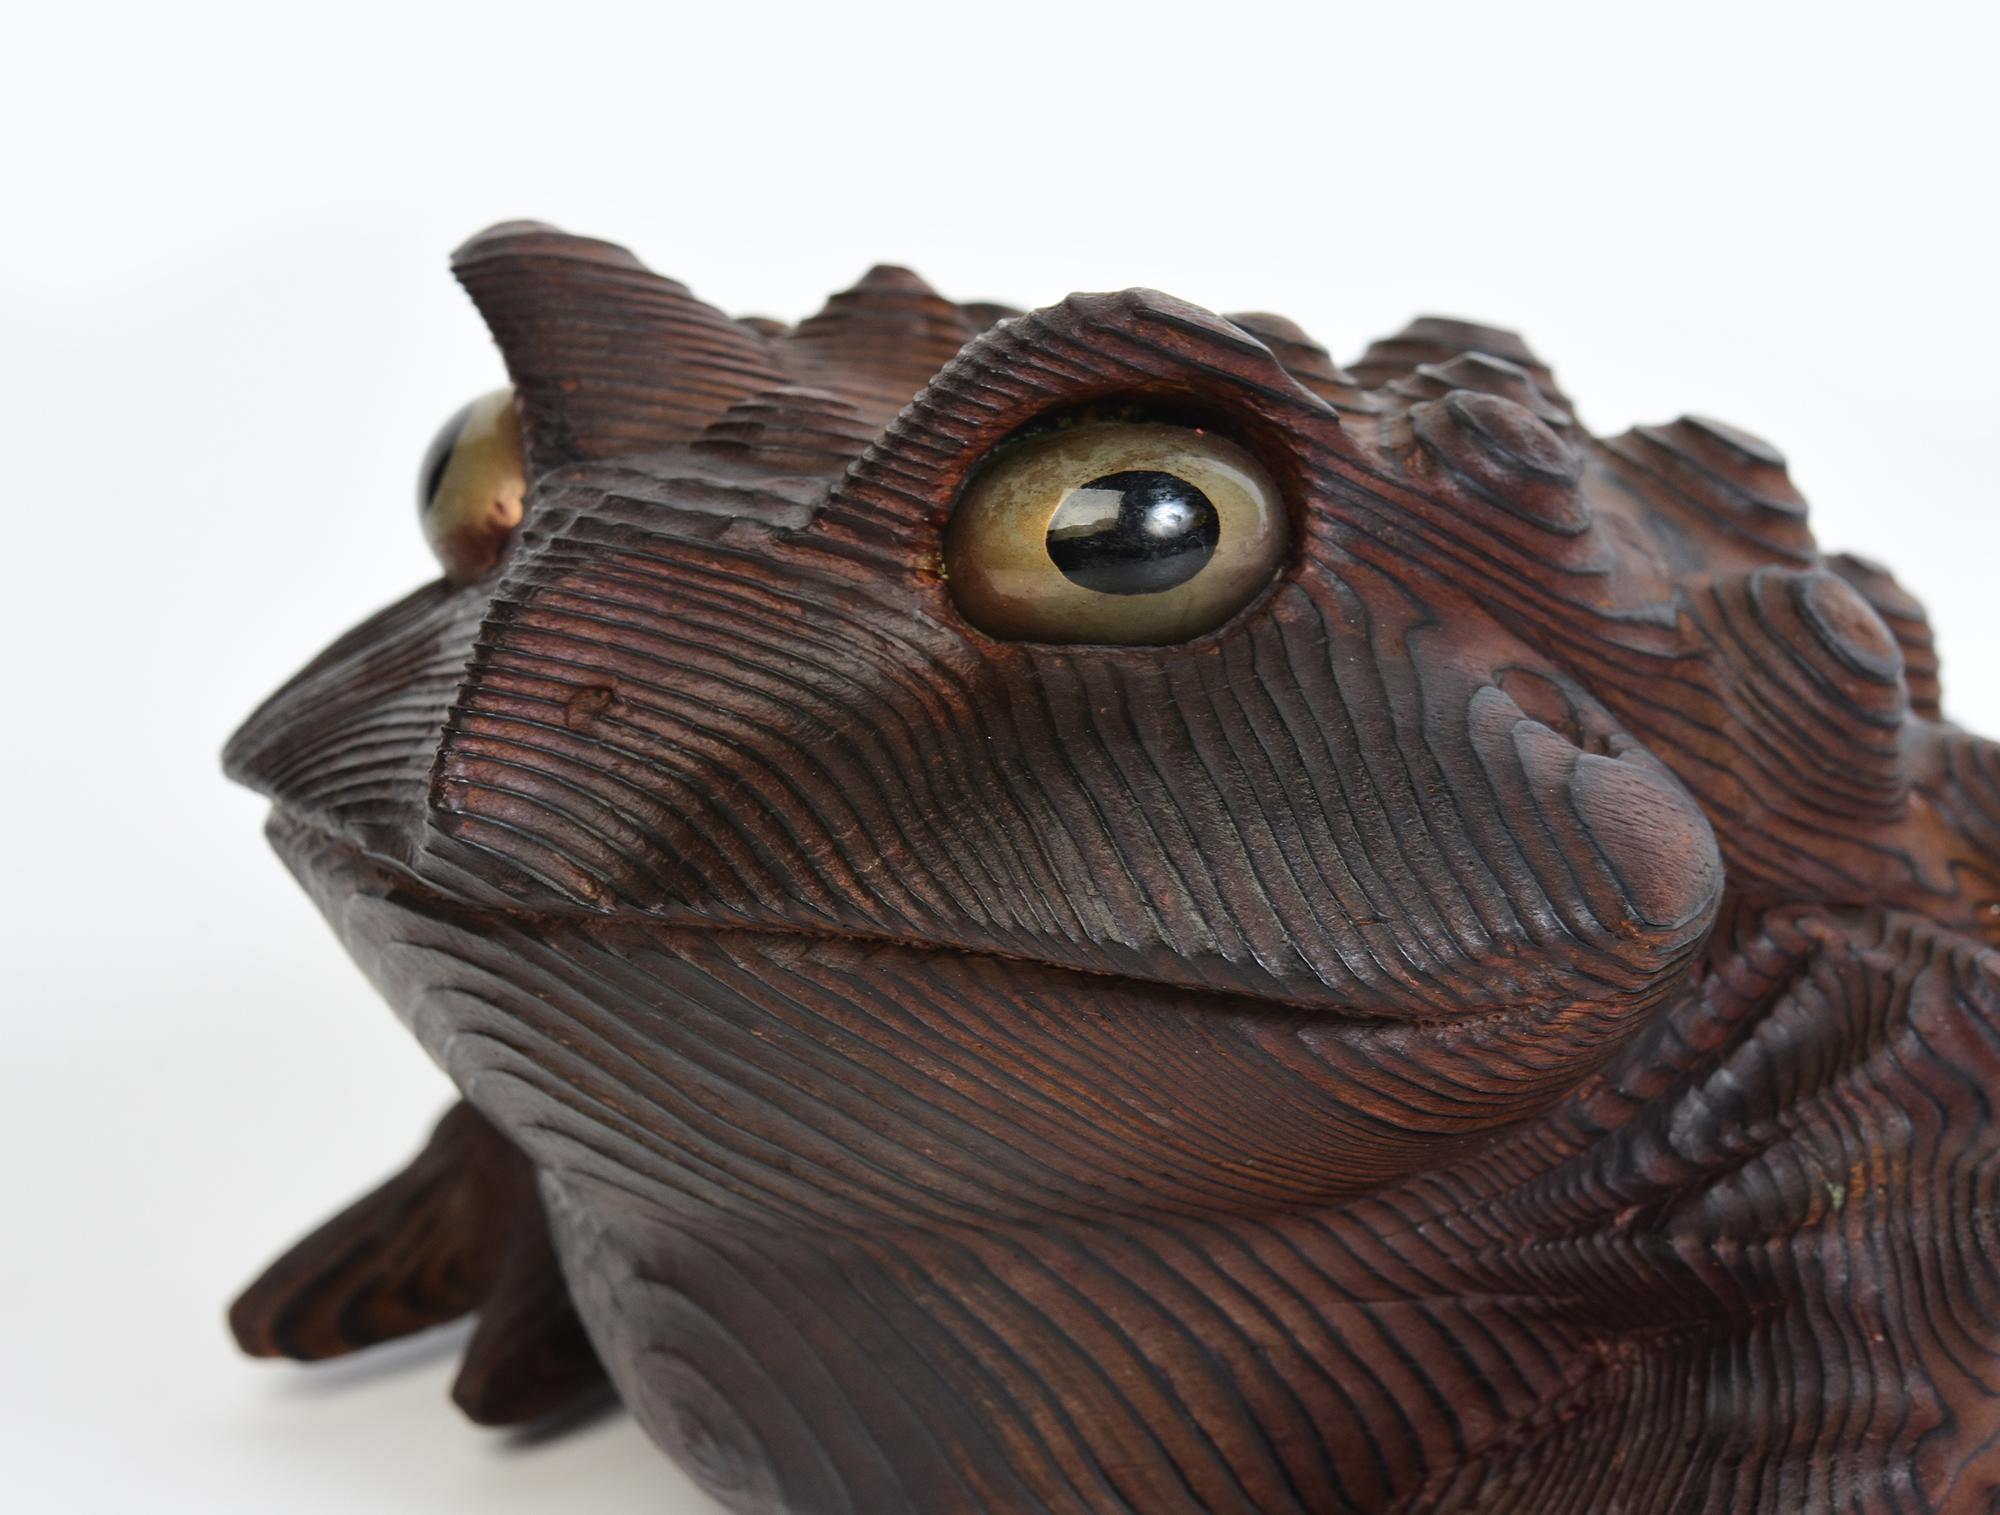 Japanese keyaki wood toad.

Age: Japan, Showa Period, Mid-20th Century
Size: Height 11.2 C.M. / Width 16.7 / Length 21.7 C.M.
Condition: Nice condition overall.